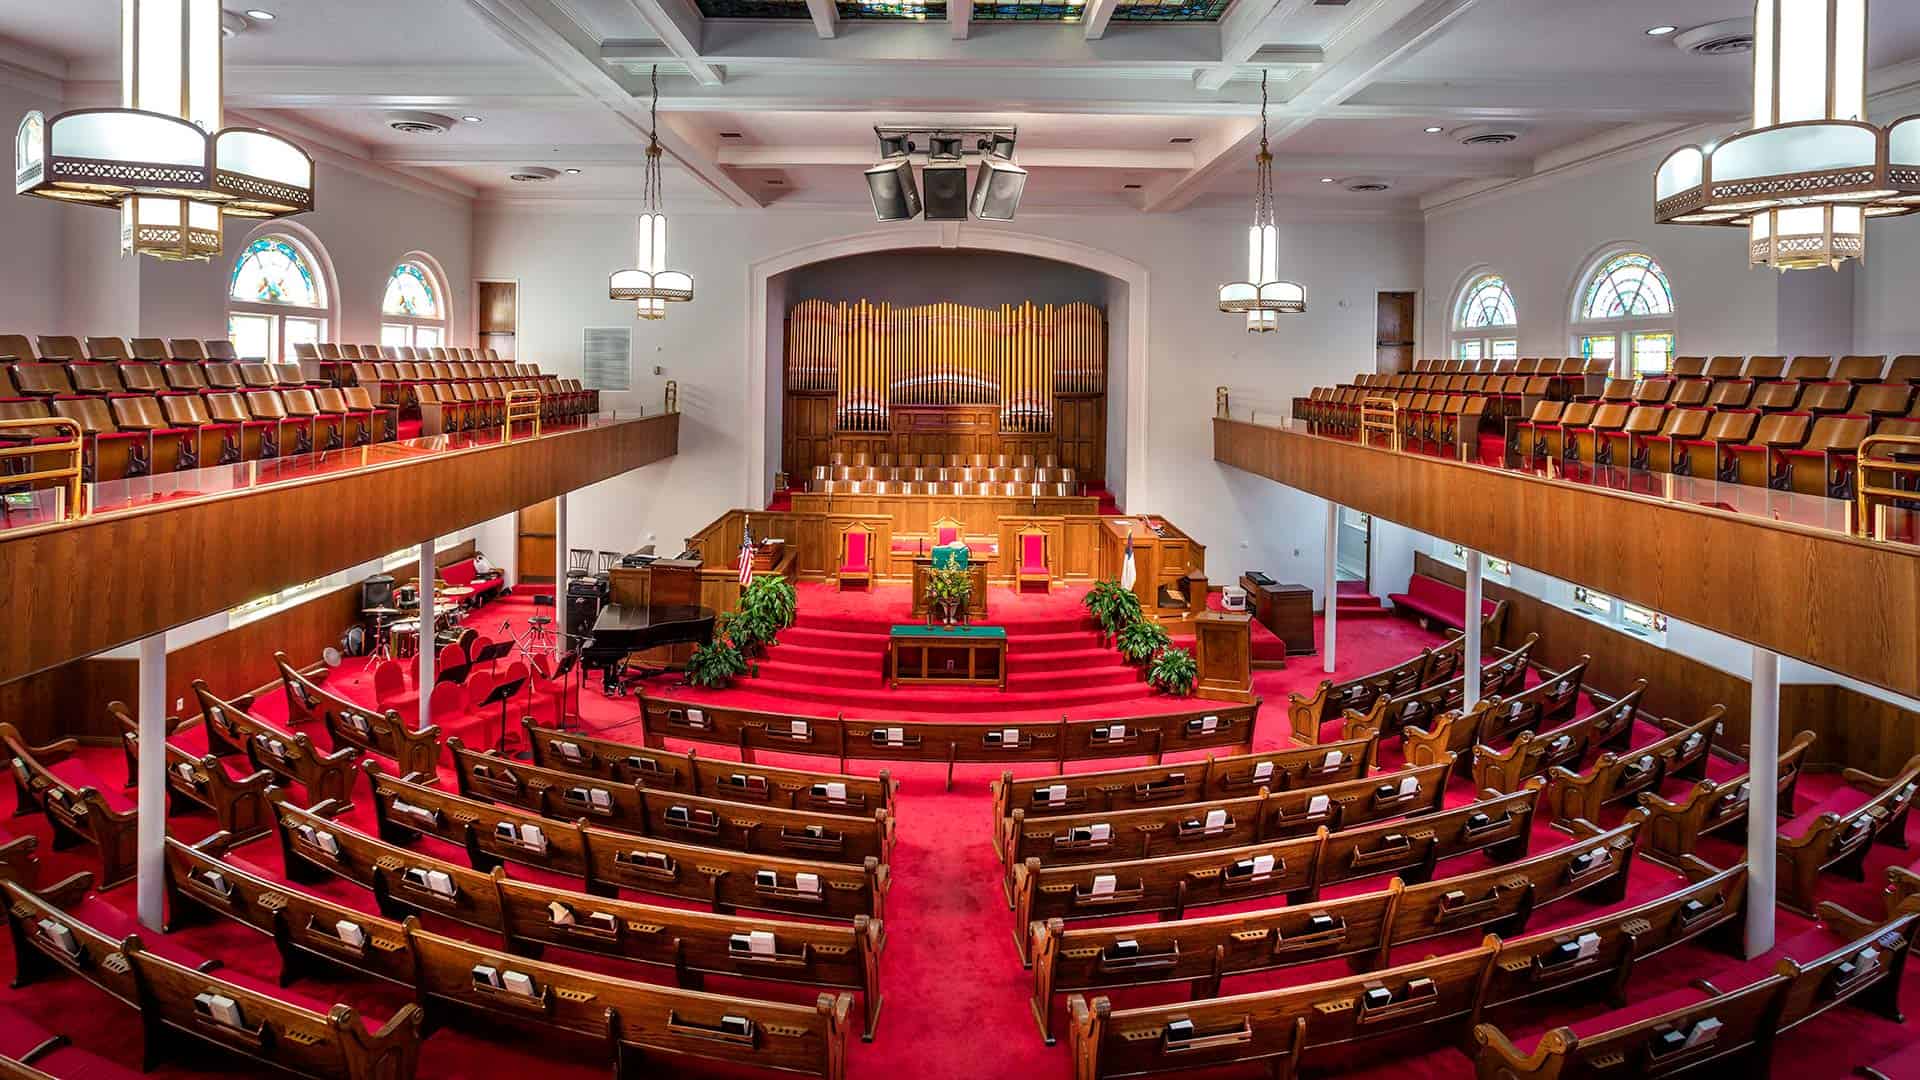 The 16th Street Baptist Church is a church in Birmingham Alabama that is very rich in history, and most of it is not good.